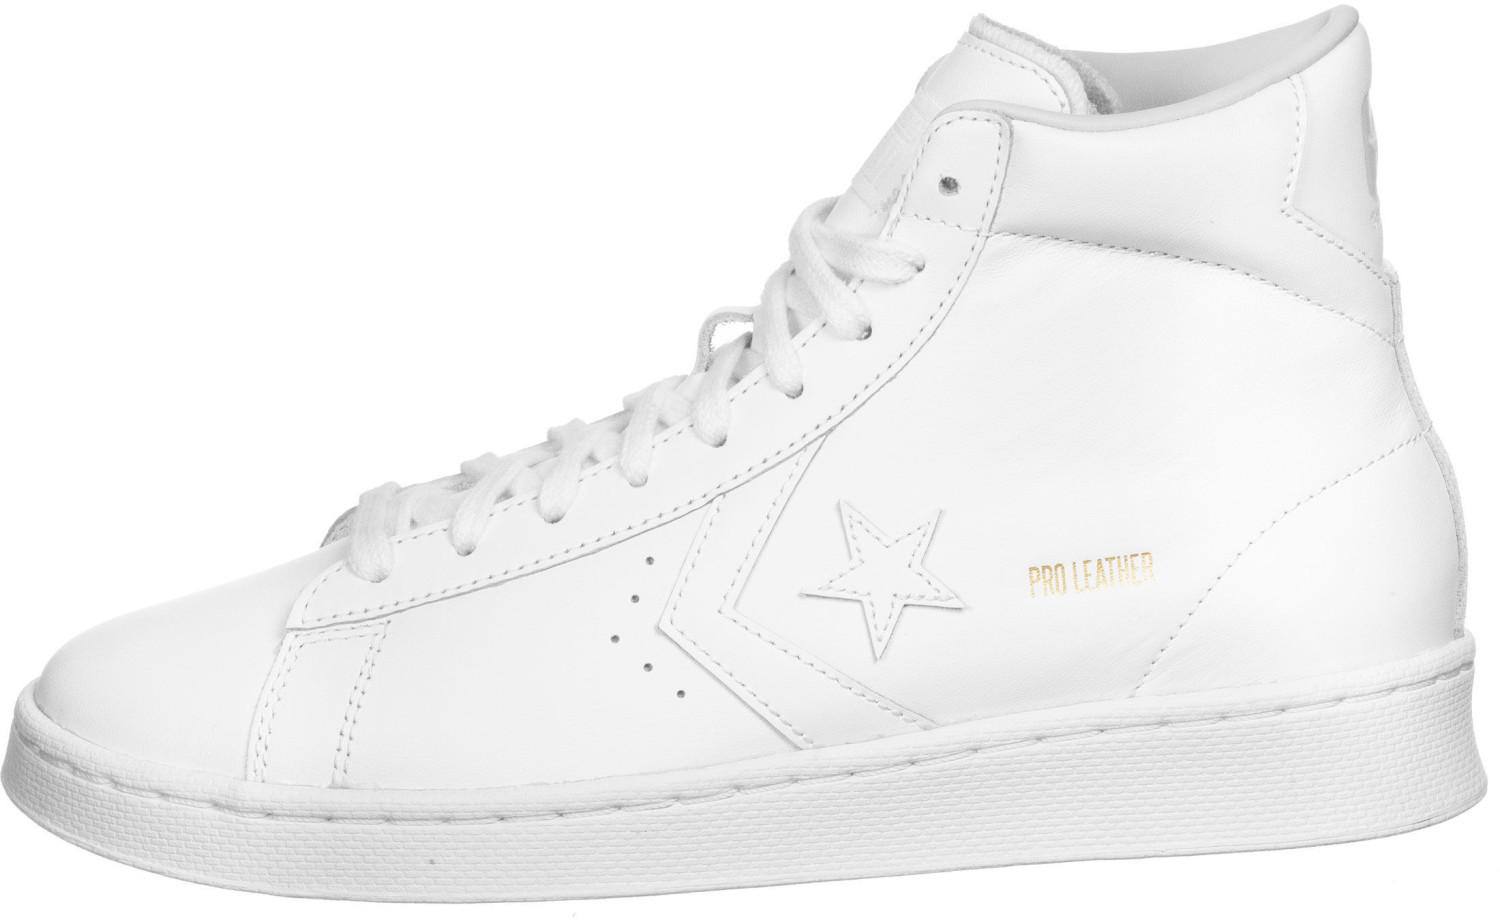 Converse Og Pro Leather High Top White White White 